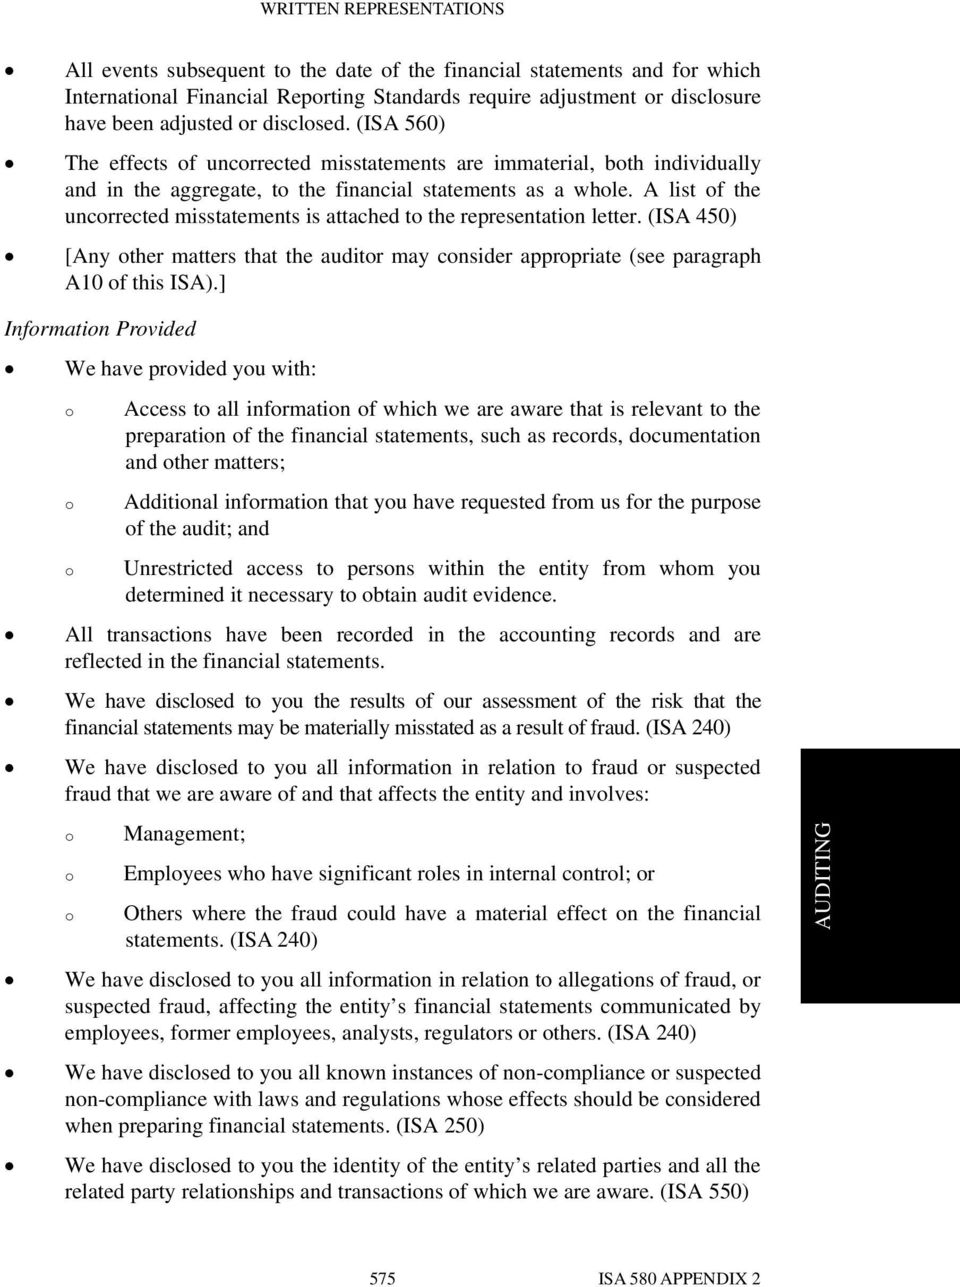 A list of the uncorrected misstatements is attached to the representation letter. (ISA 450) [Any other matters that the auditor may consider appropriate (see paragraph A10 of this ISA).